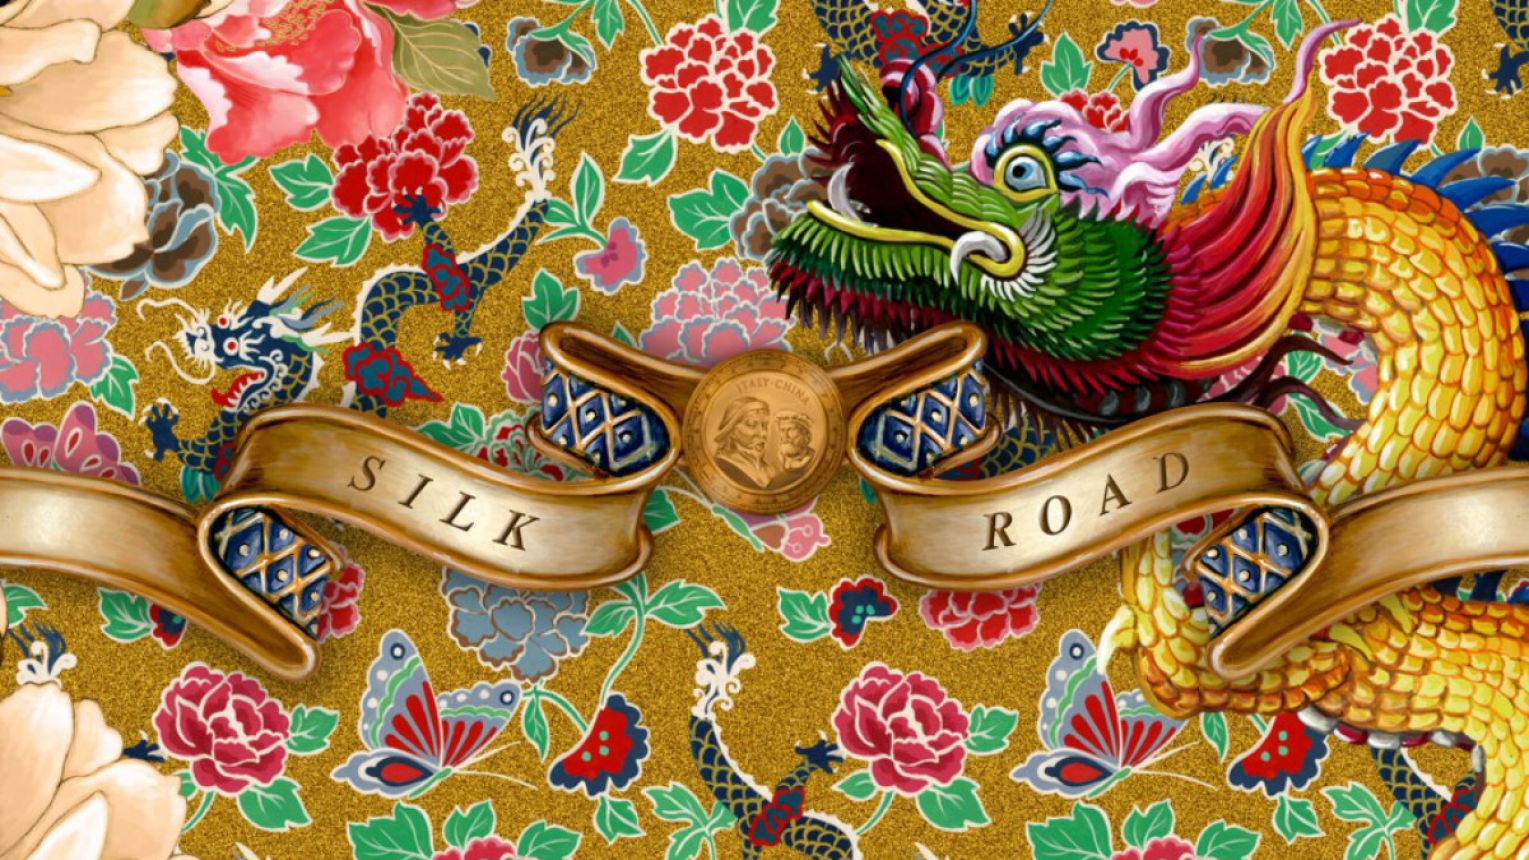 Dolce&Gabbana's Silk Road Scarf Collection: a tribute to China-Italy culture